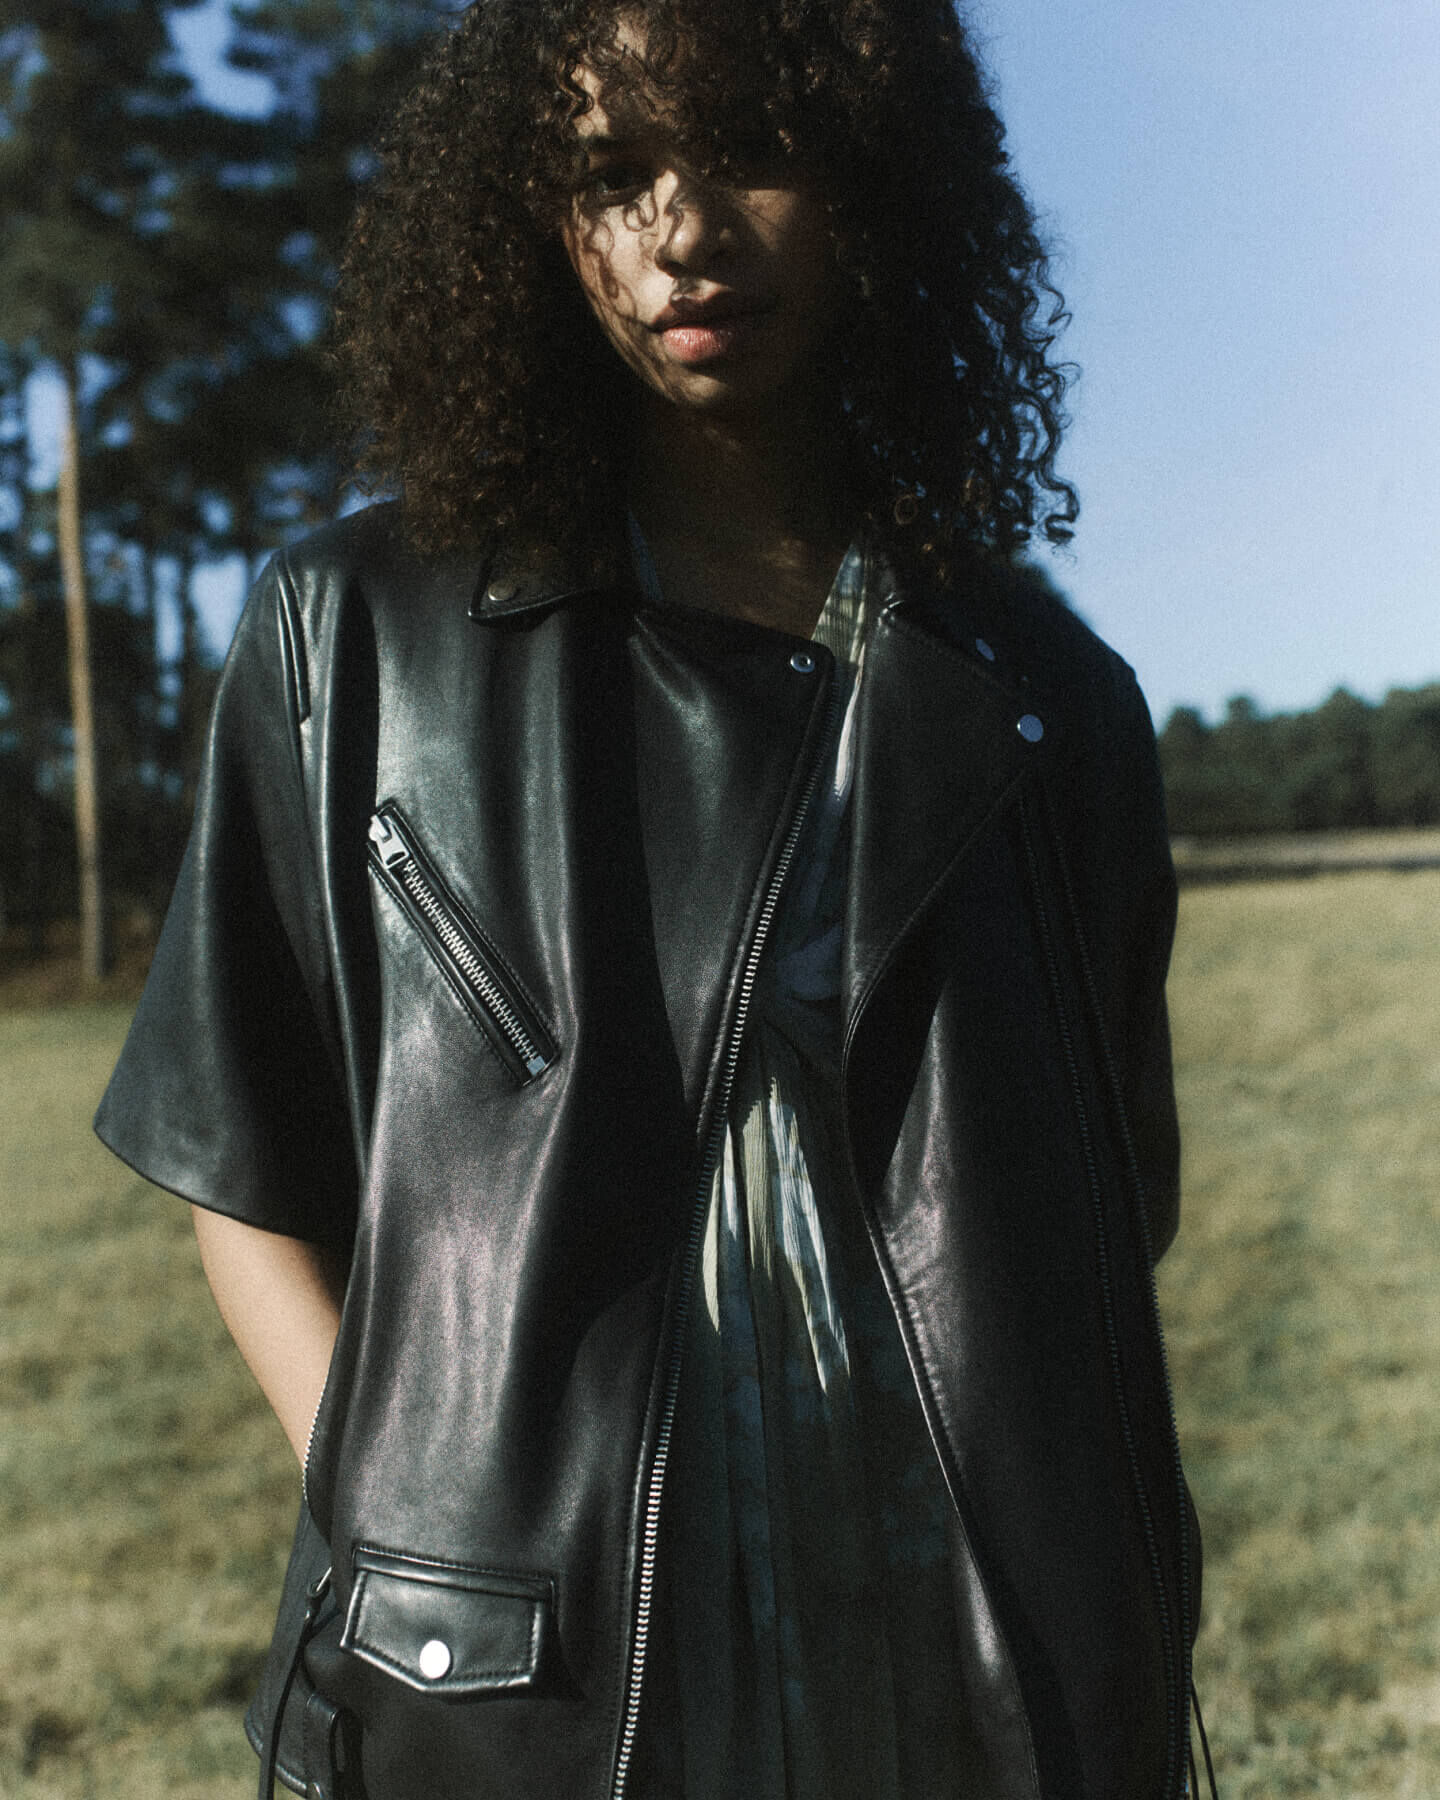 Woman wearing and black leather jacket and green dress in a field